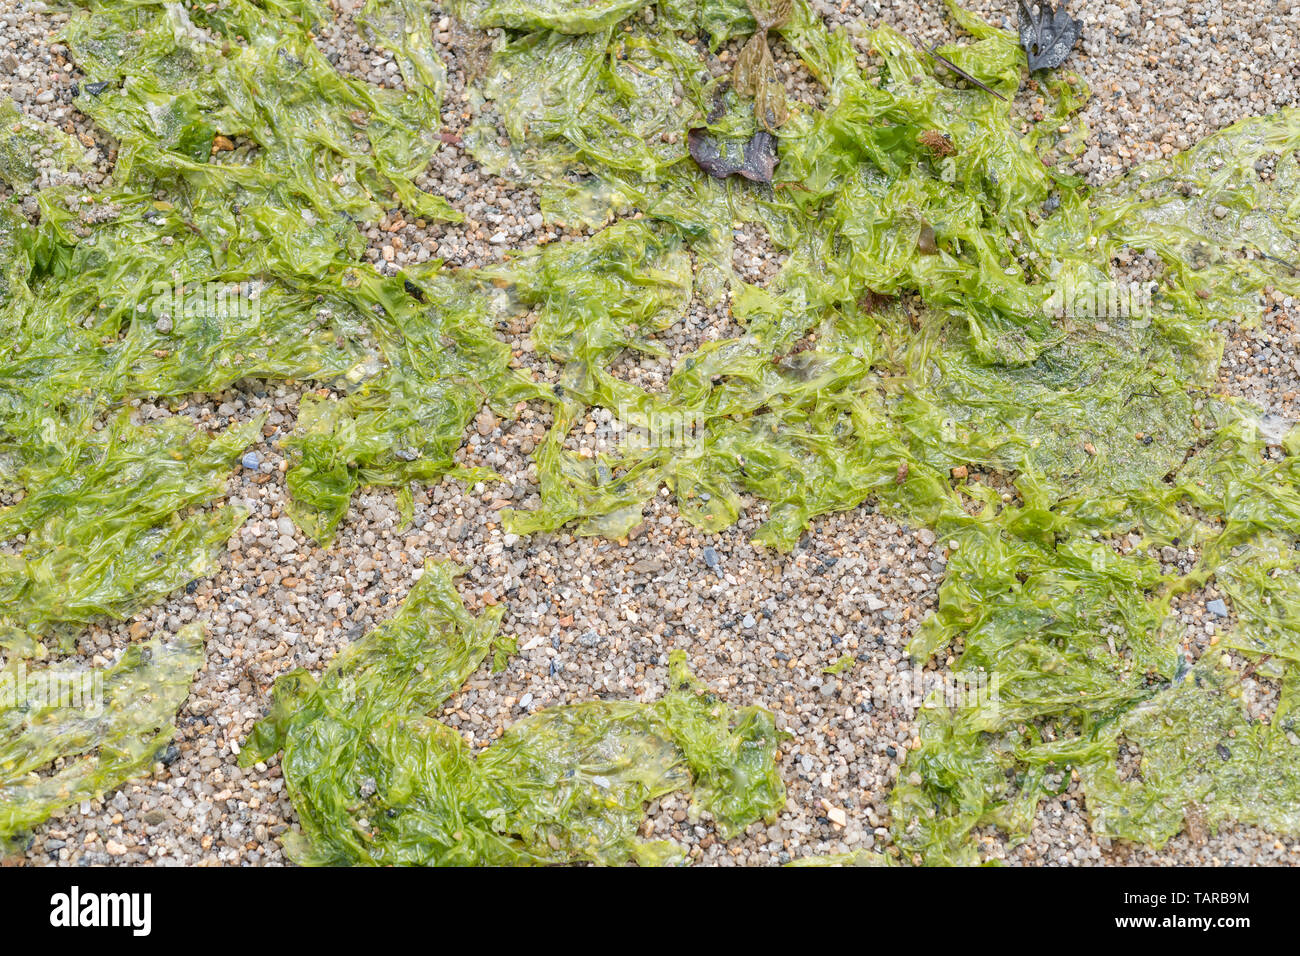 Close-up of the green seaweed Sea Lettuce / Ulva lactuca washed ashore on beach & deposited at the drift line / tideline. Fresh Sea Lettuce edible. Stock Photo